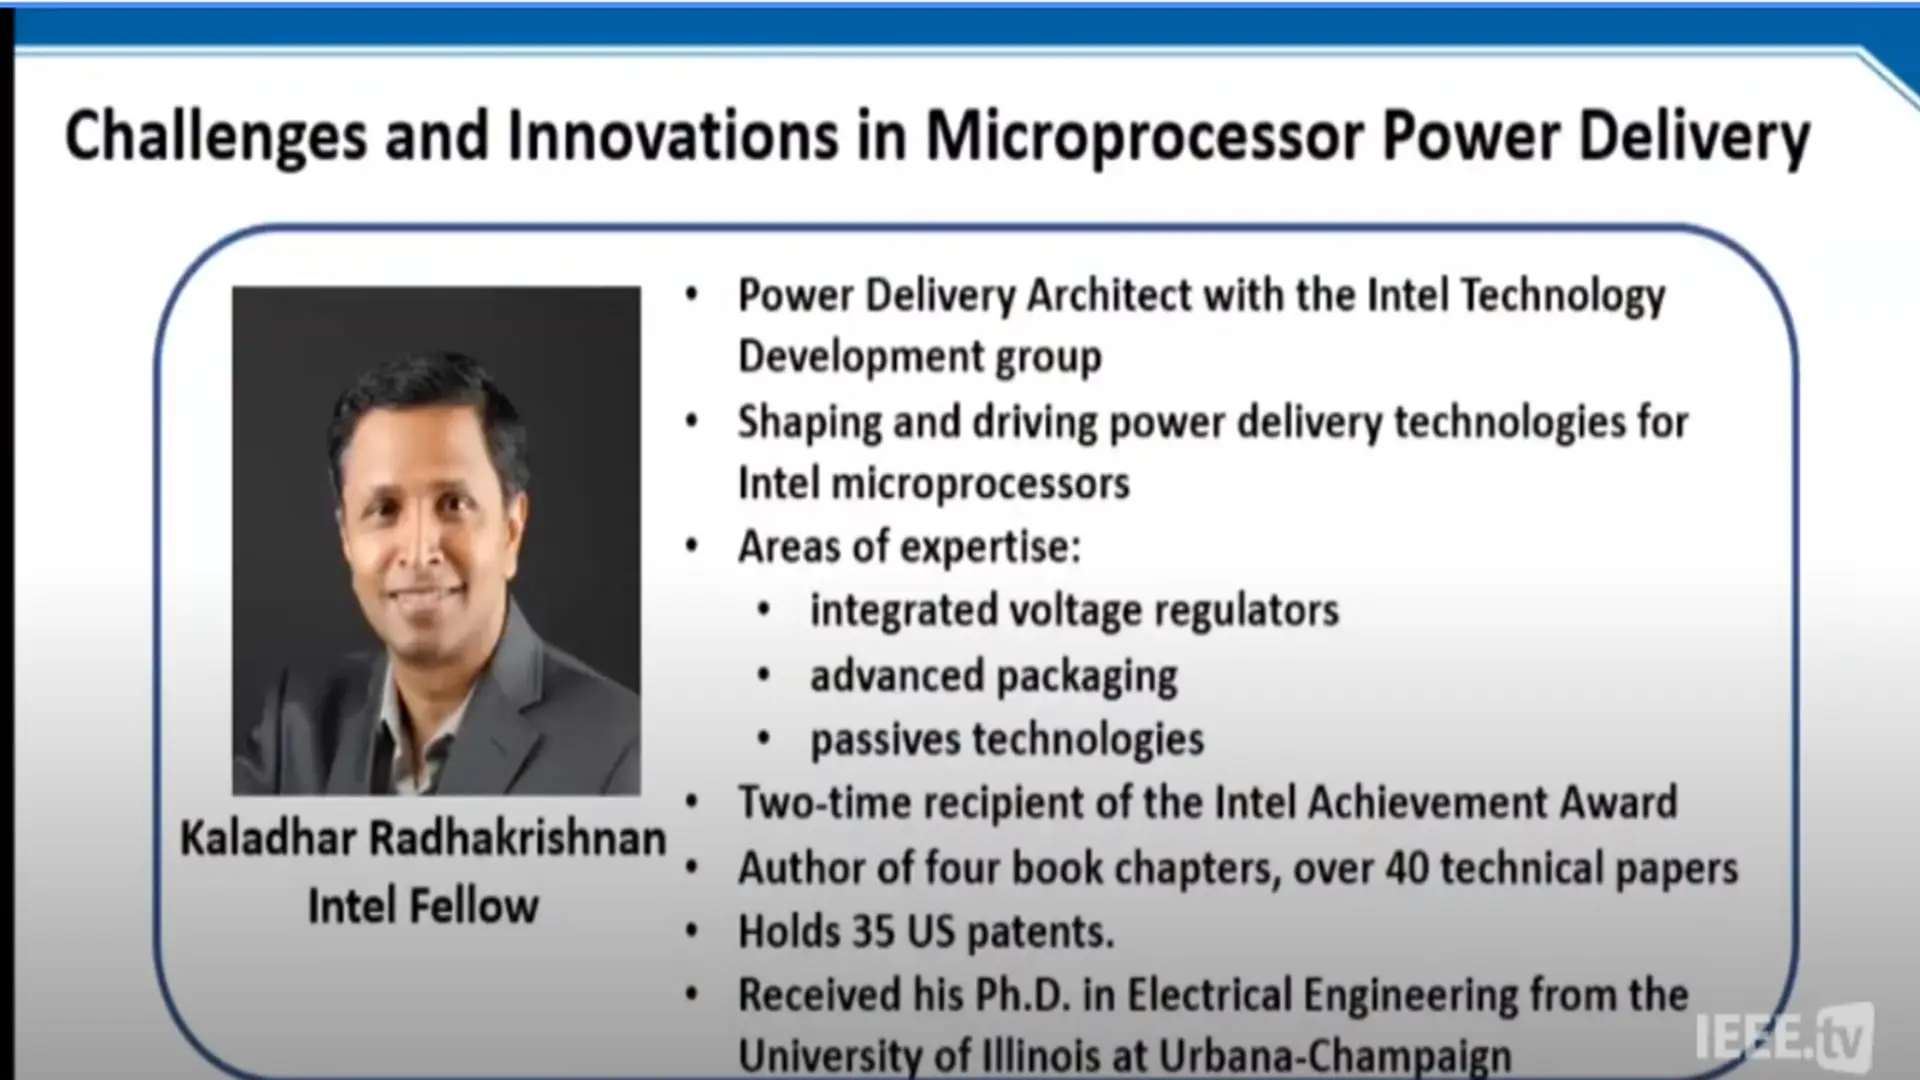 Challenges and Innovations in Microprocessor Power Delivery